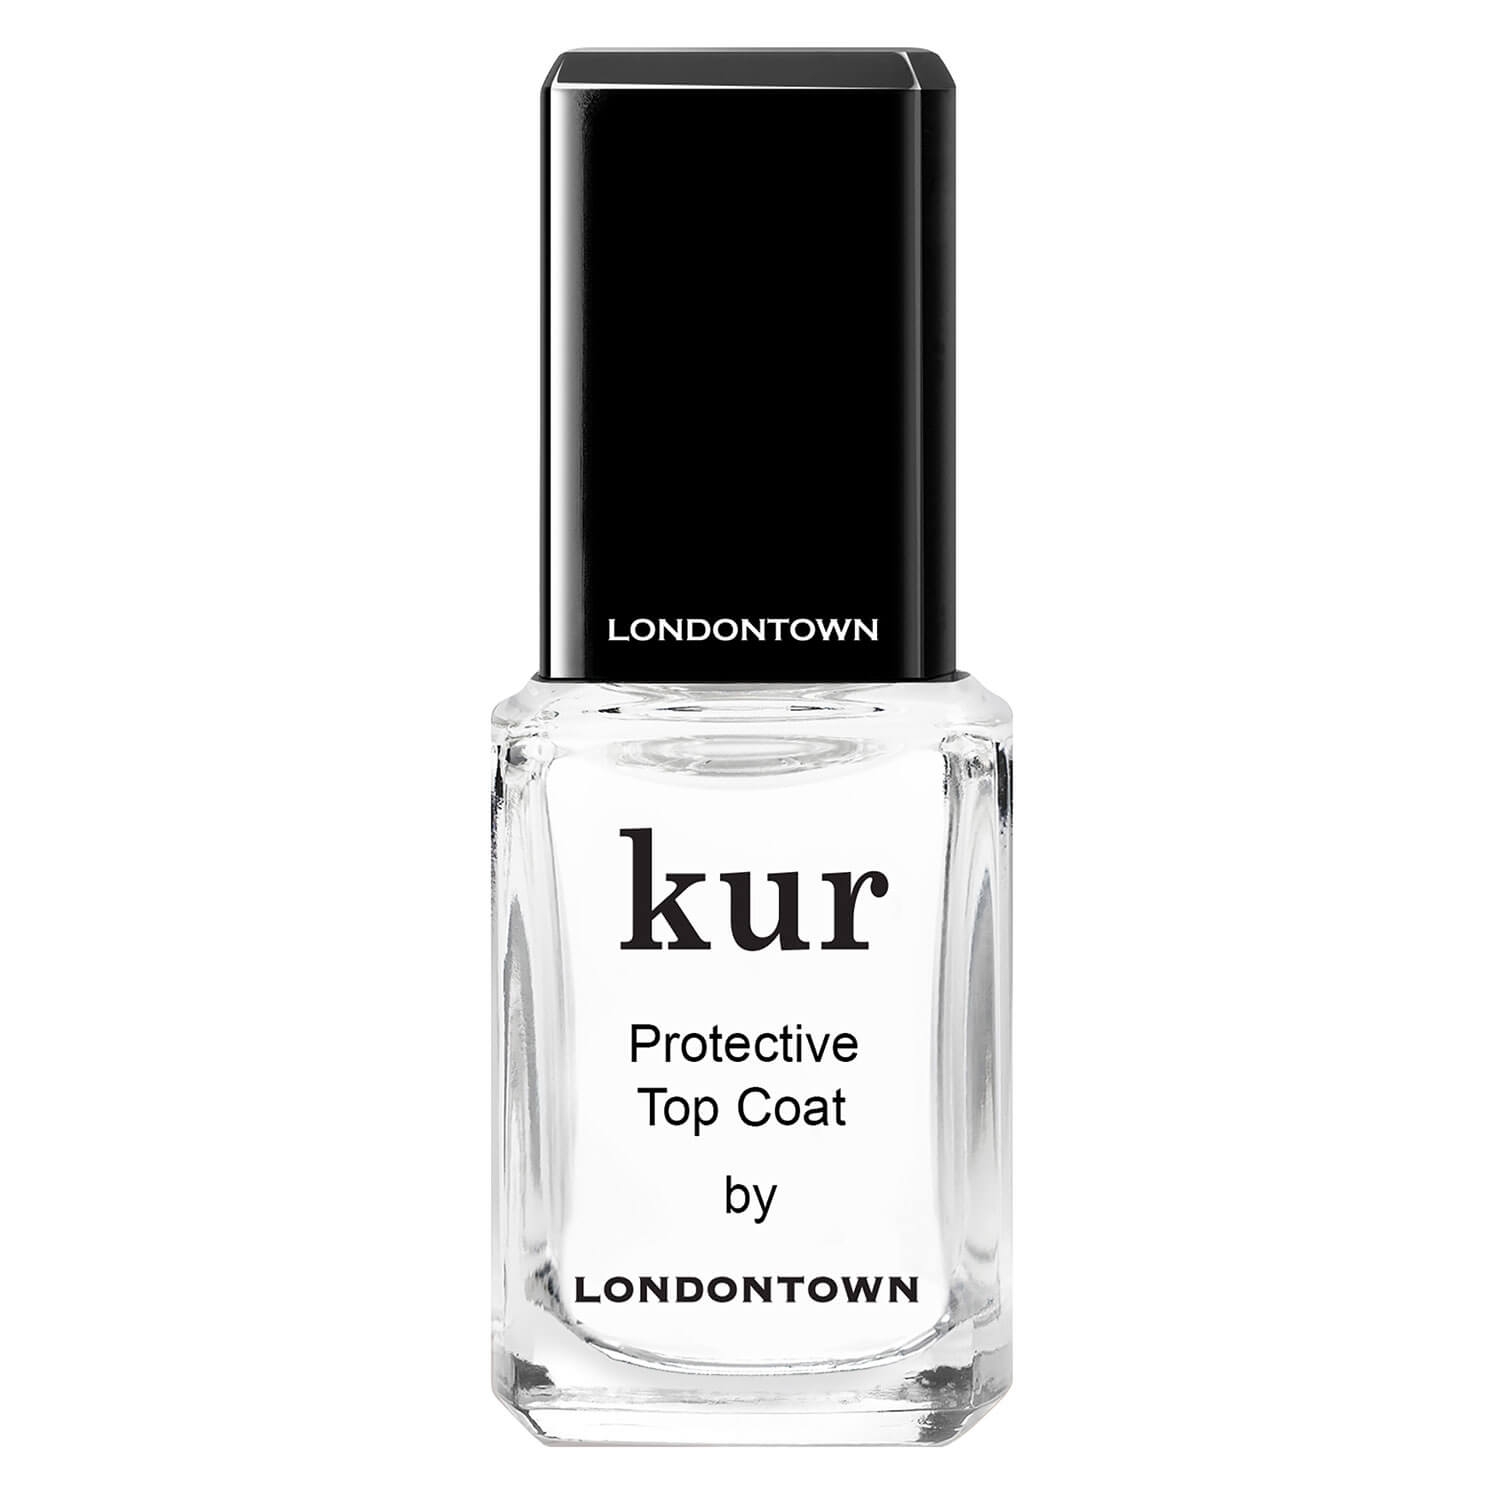 Product image from kur - Protective Top Coat